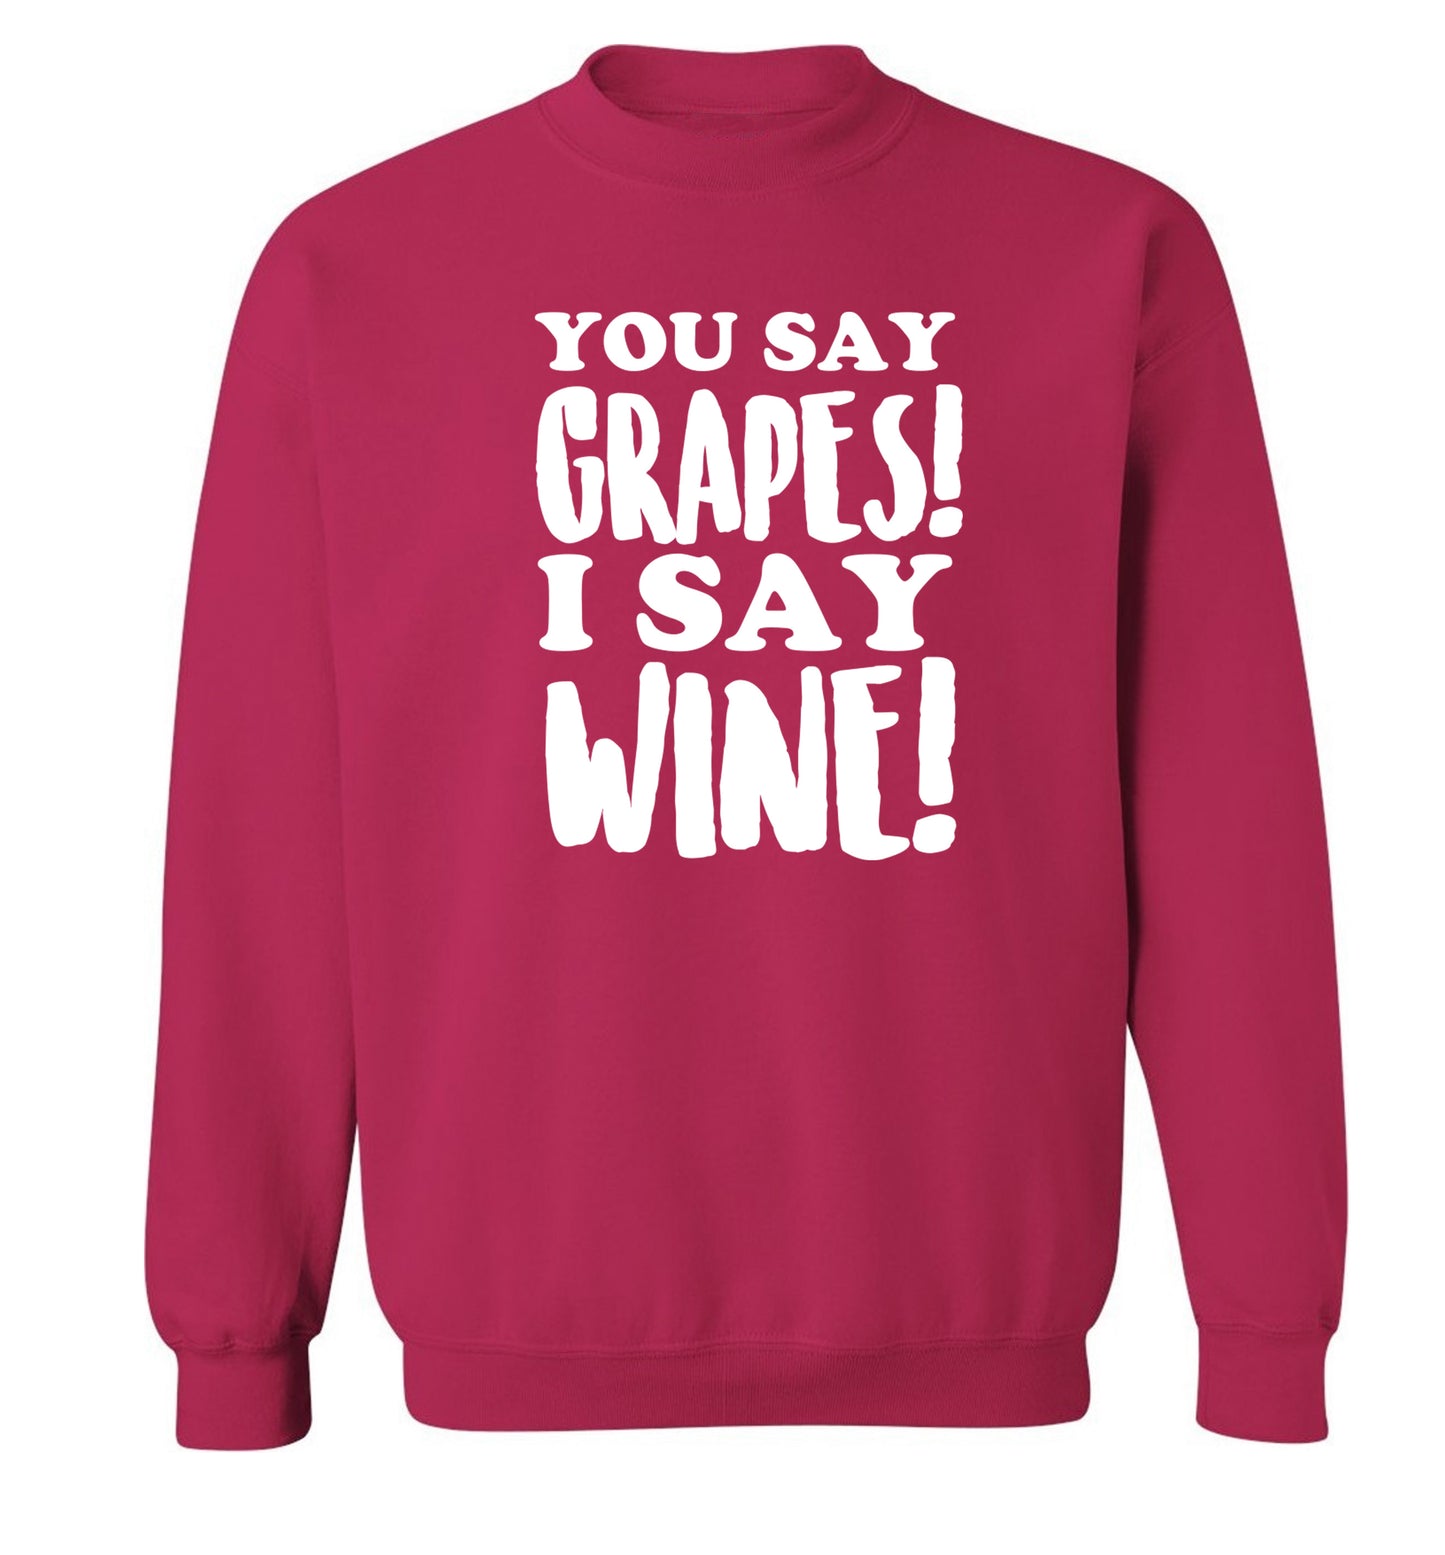 You say grapes I say wine! Adult's unisex pink Sweater 2XL